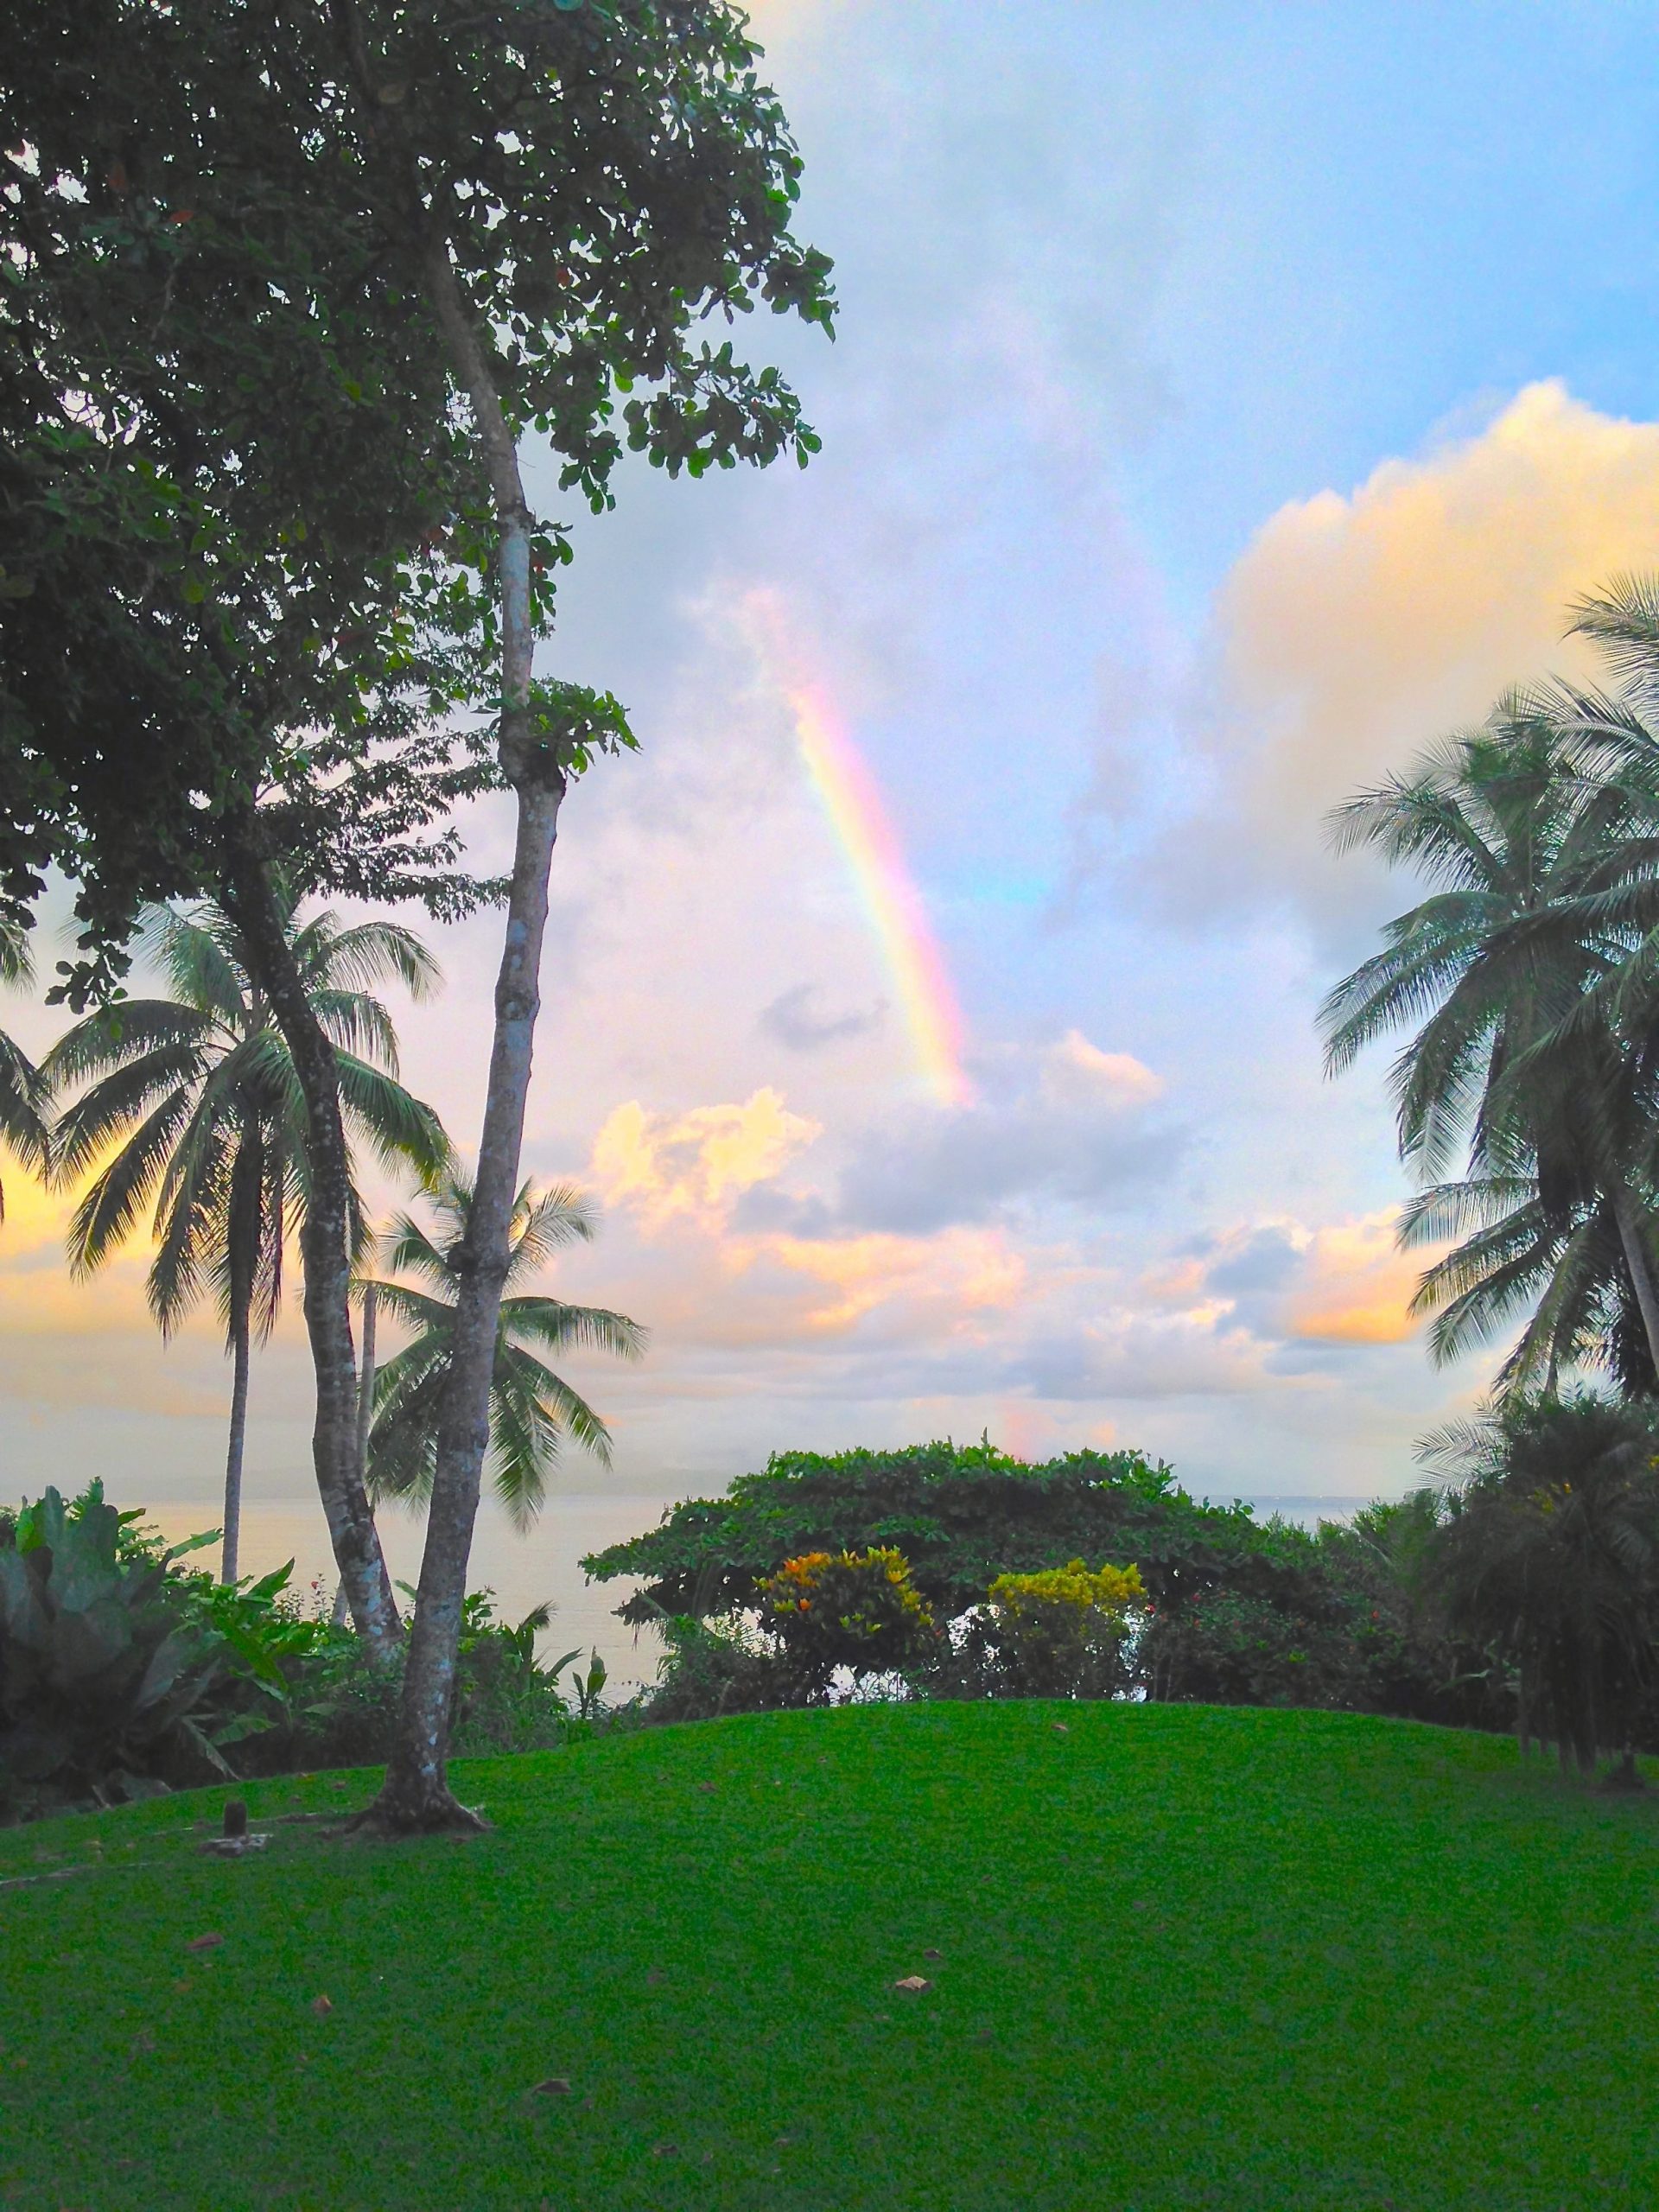 Rainbow over the beach with palm trees at Playa Pan Dulce Costa Rica